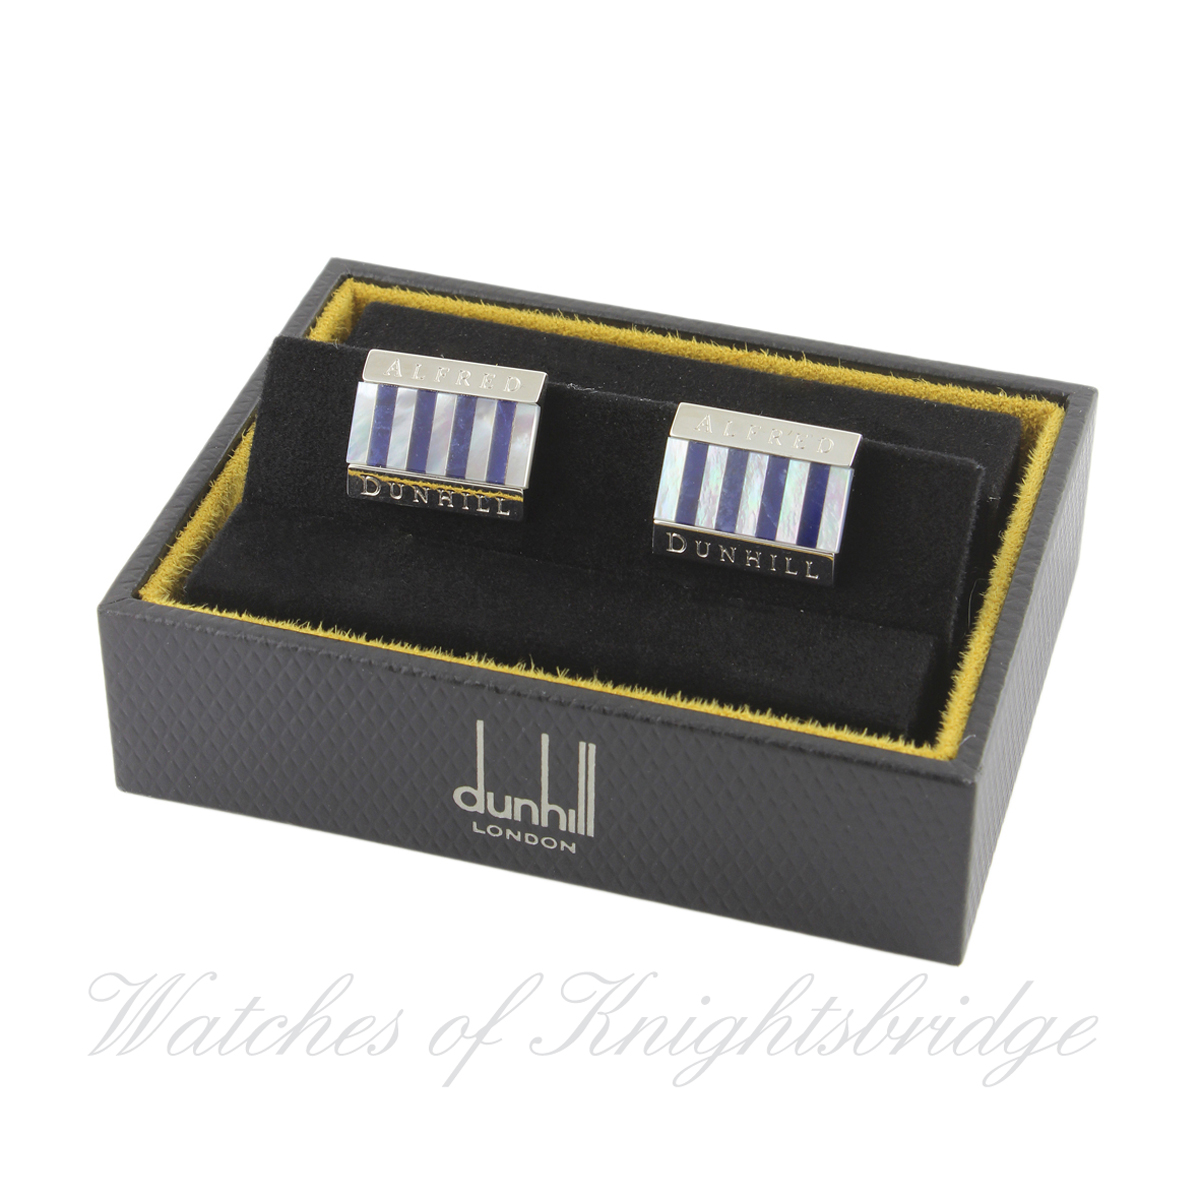 TWO PAIRS OF SOLID SILVER ALFRED DUNHILL CUFFLINKS IN ORIGINAL BOXES One set with mother of